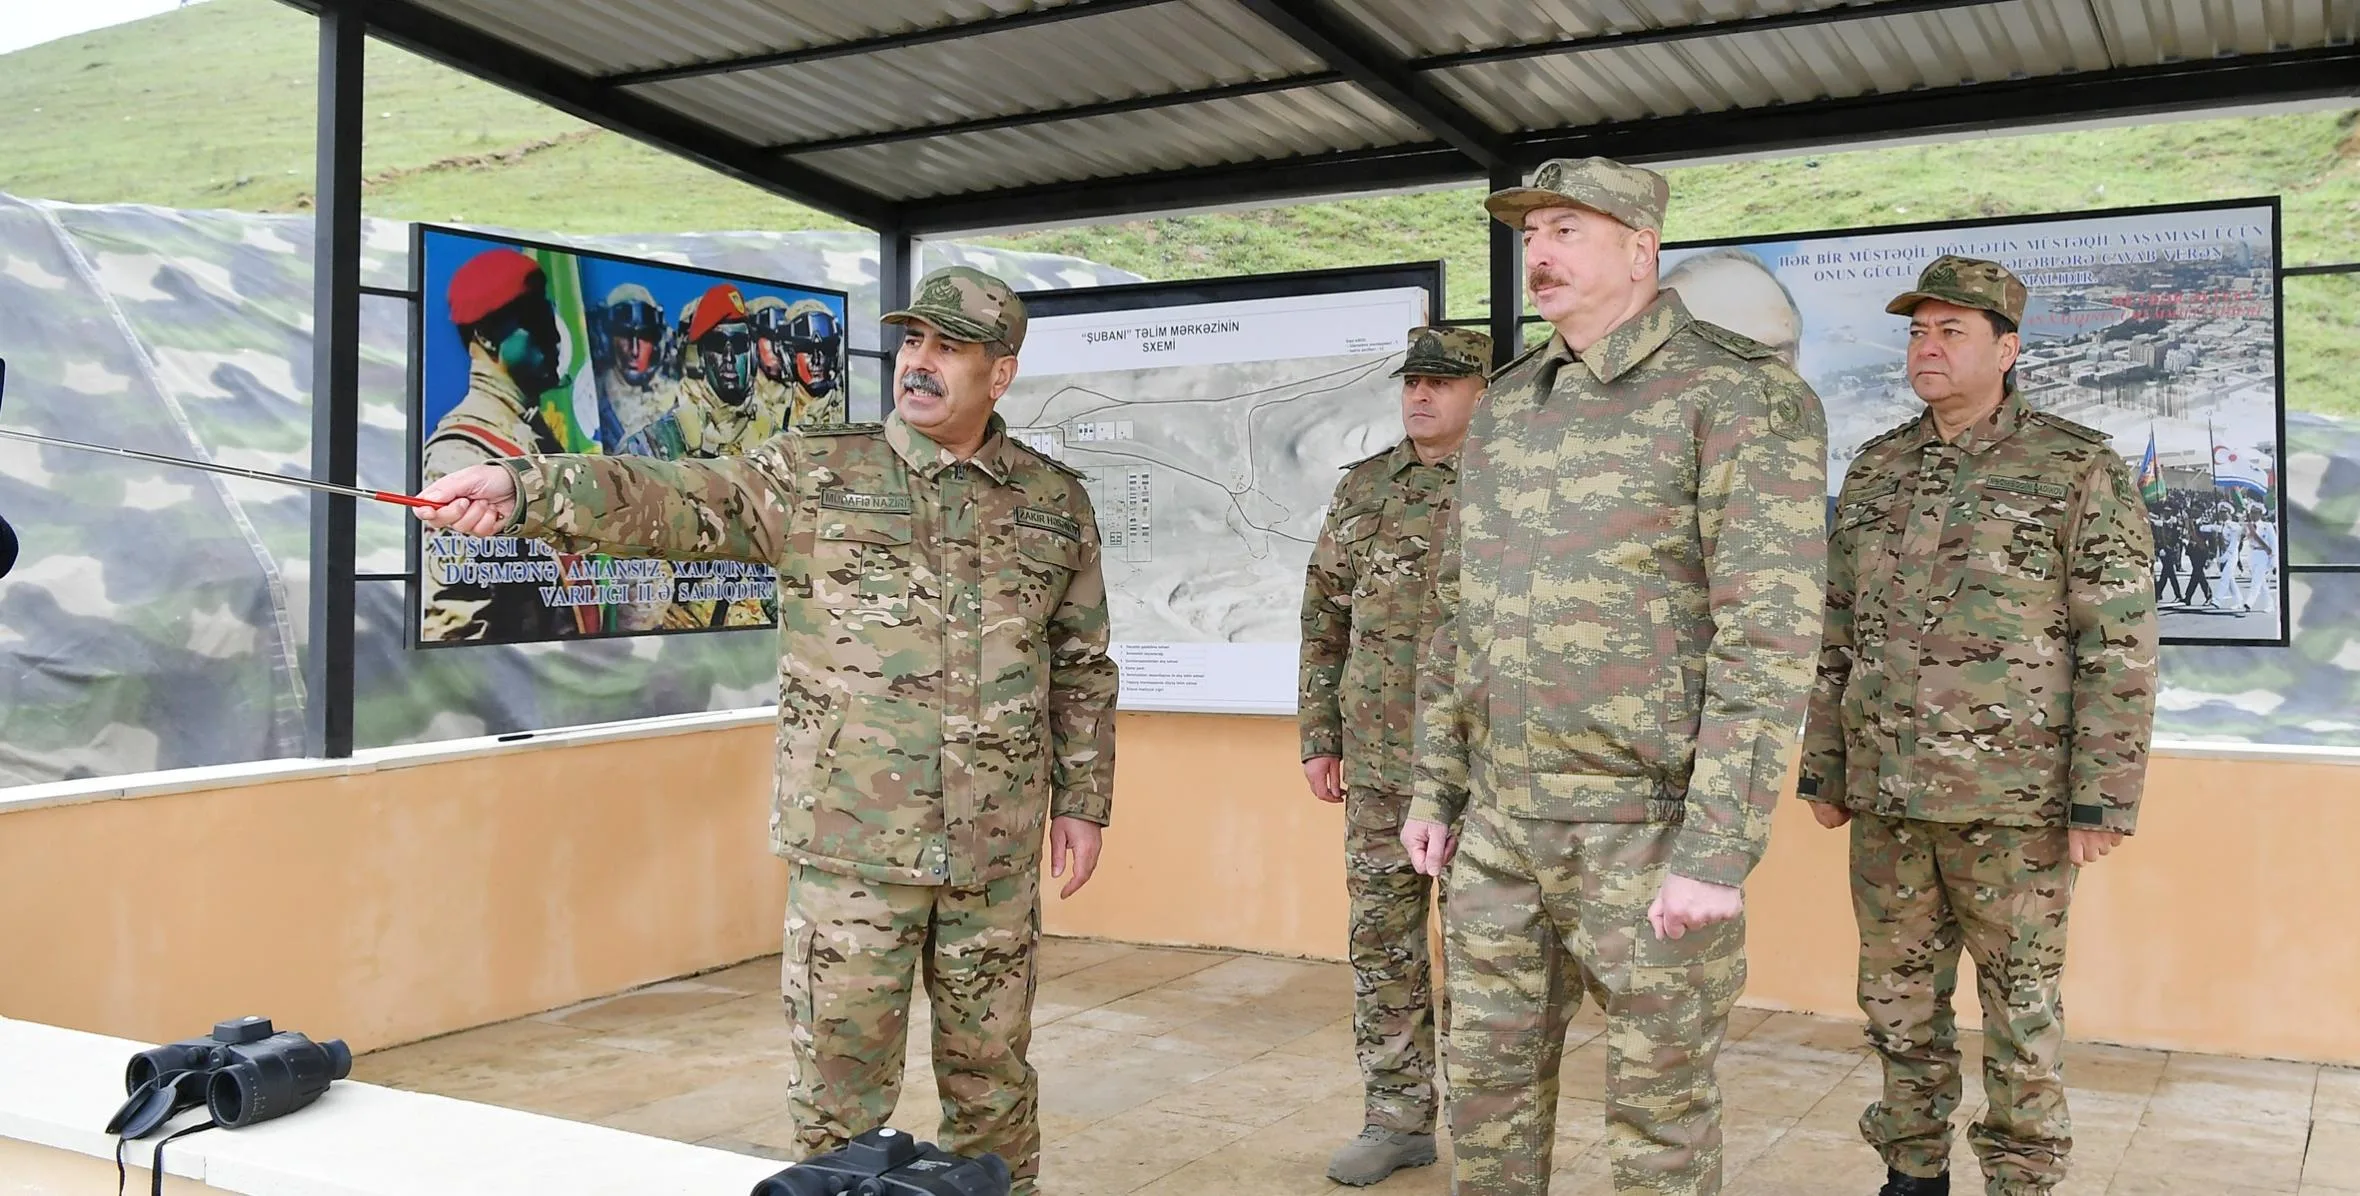 The victory in Karabakh is the result of the strong leadership of President Ilham Aliyev and regional leaders believe that he has made major updates to the country's foreign and domestic policies that have ensured peace in the Caucasian region